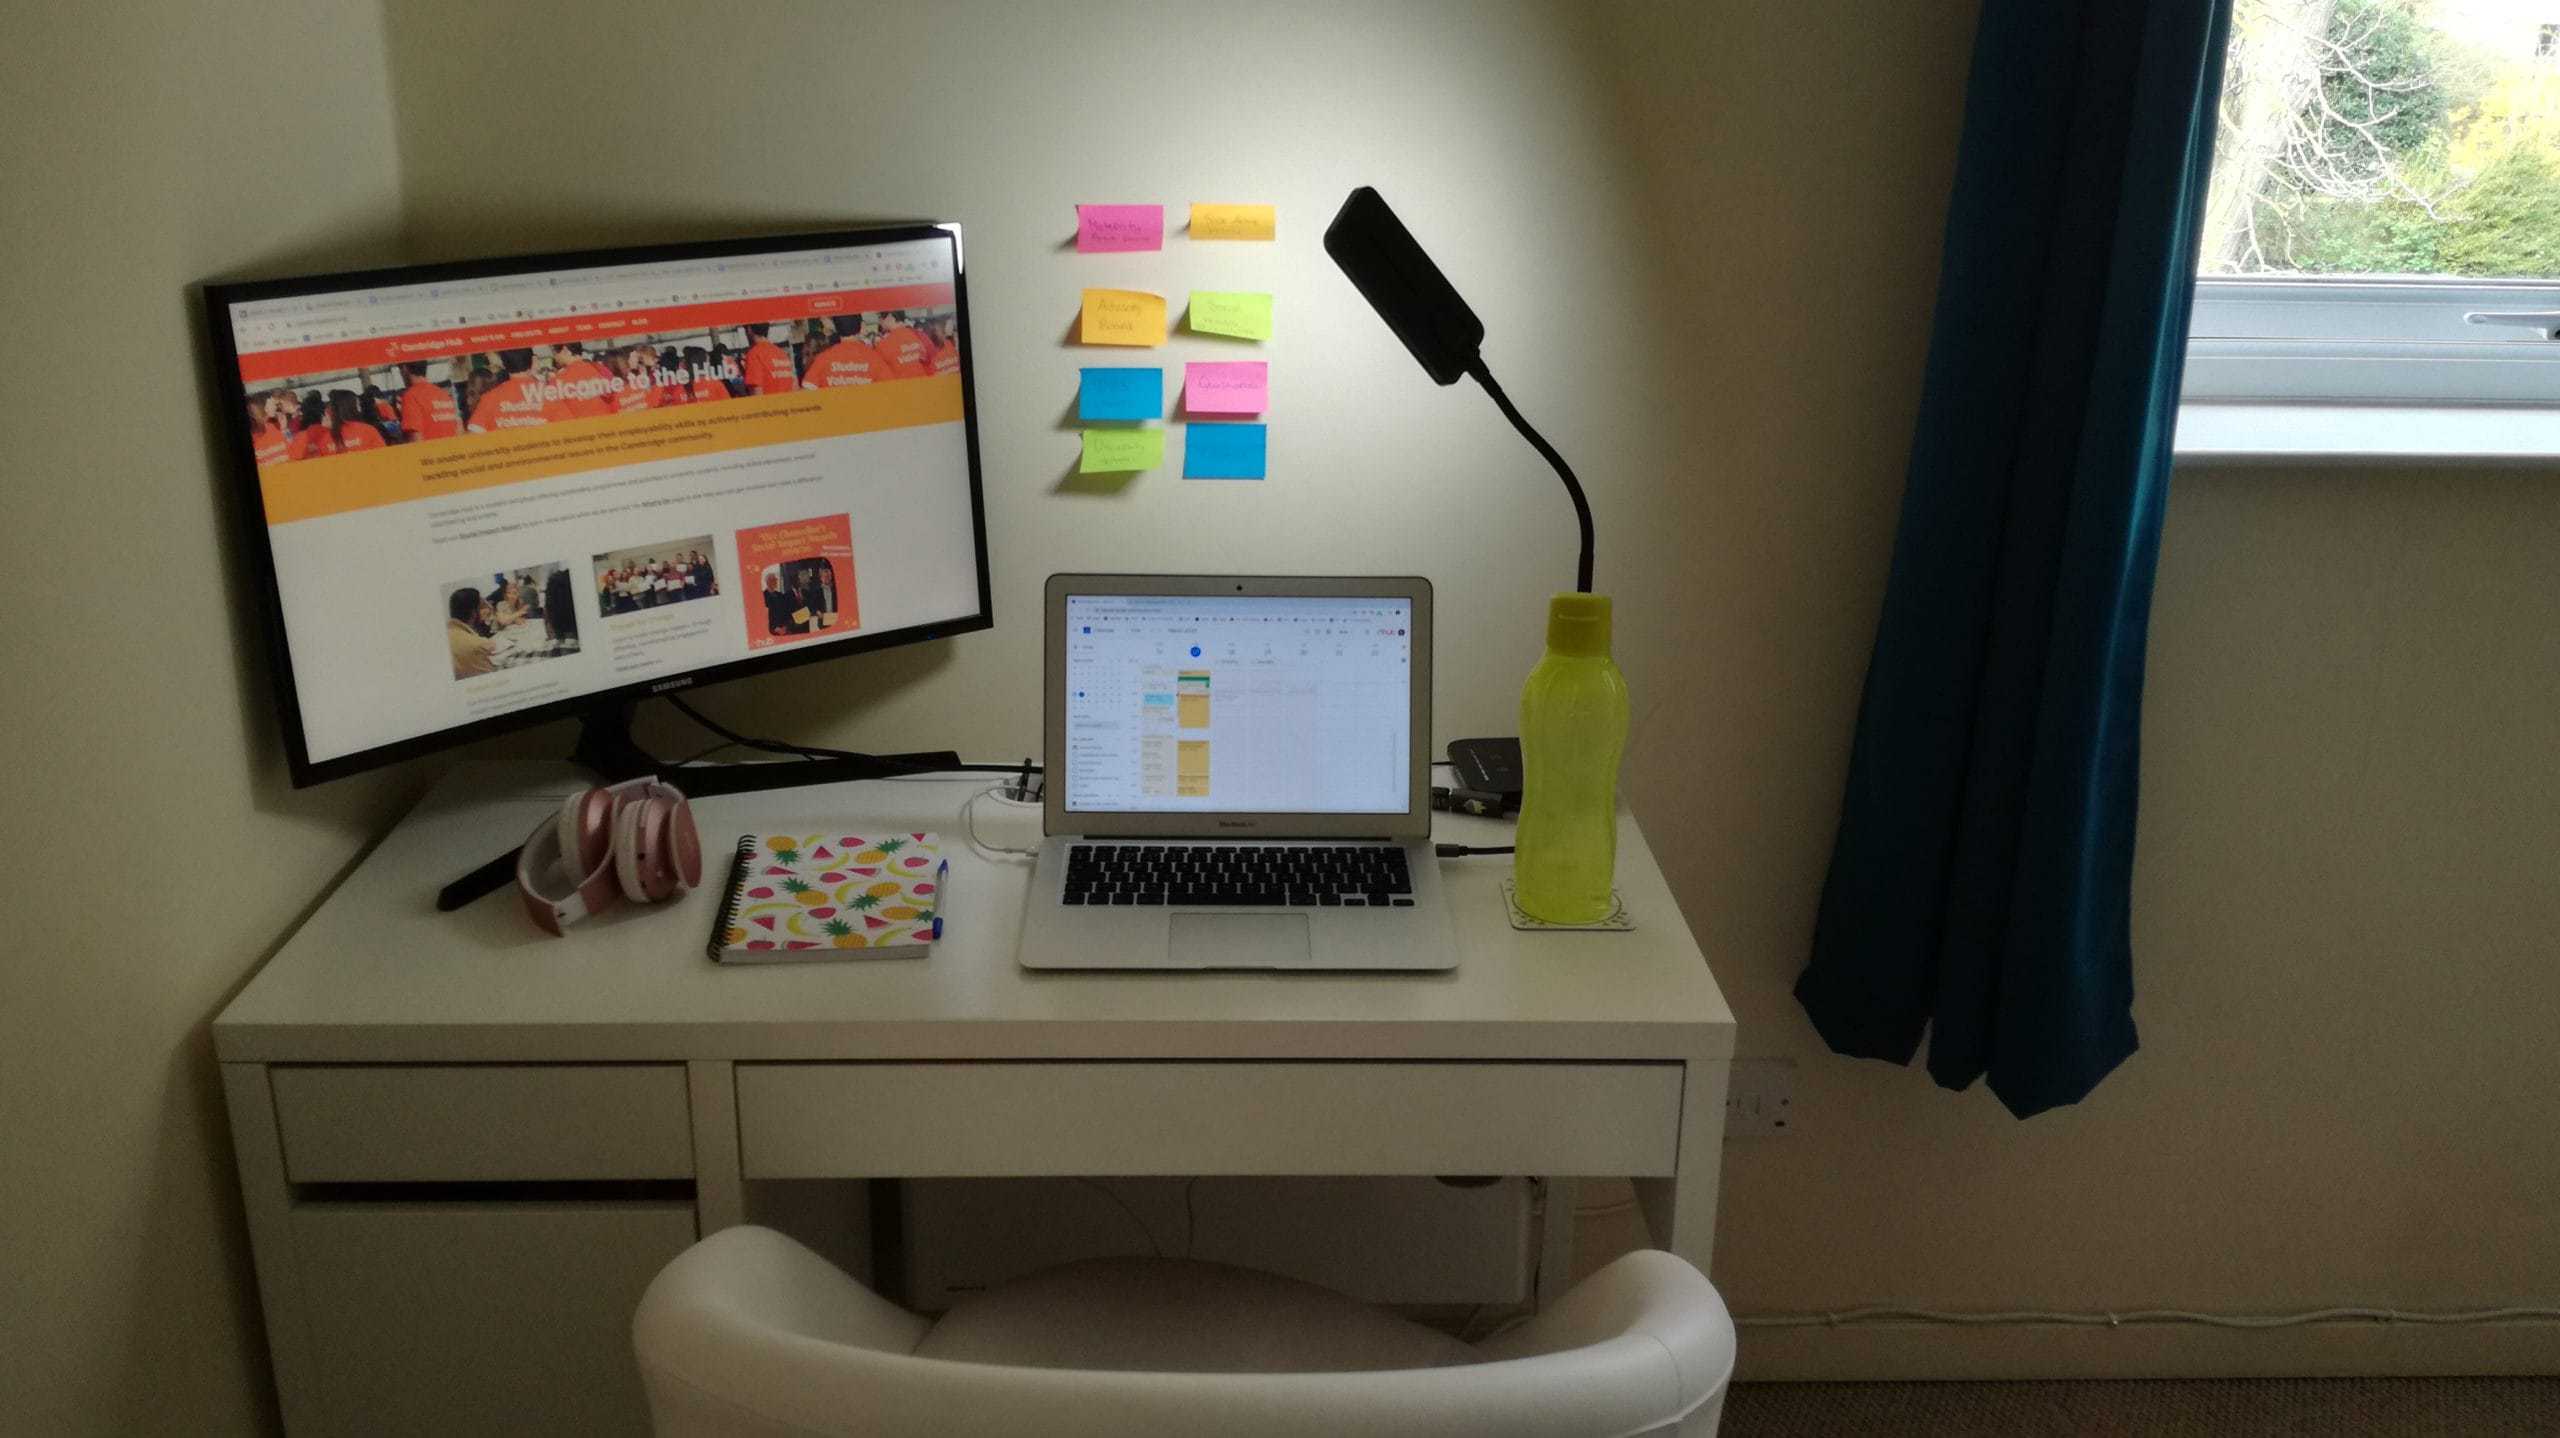 A white desk with a white chair tucked in has a monitor, laptop, pink headphones, notebook and yellow water bottle on it. On the wall are 8 multicoloured post-it notes.